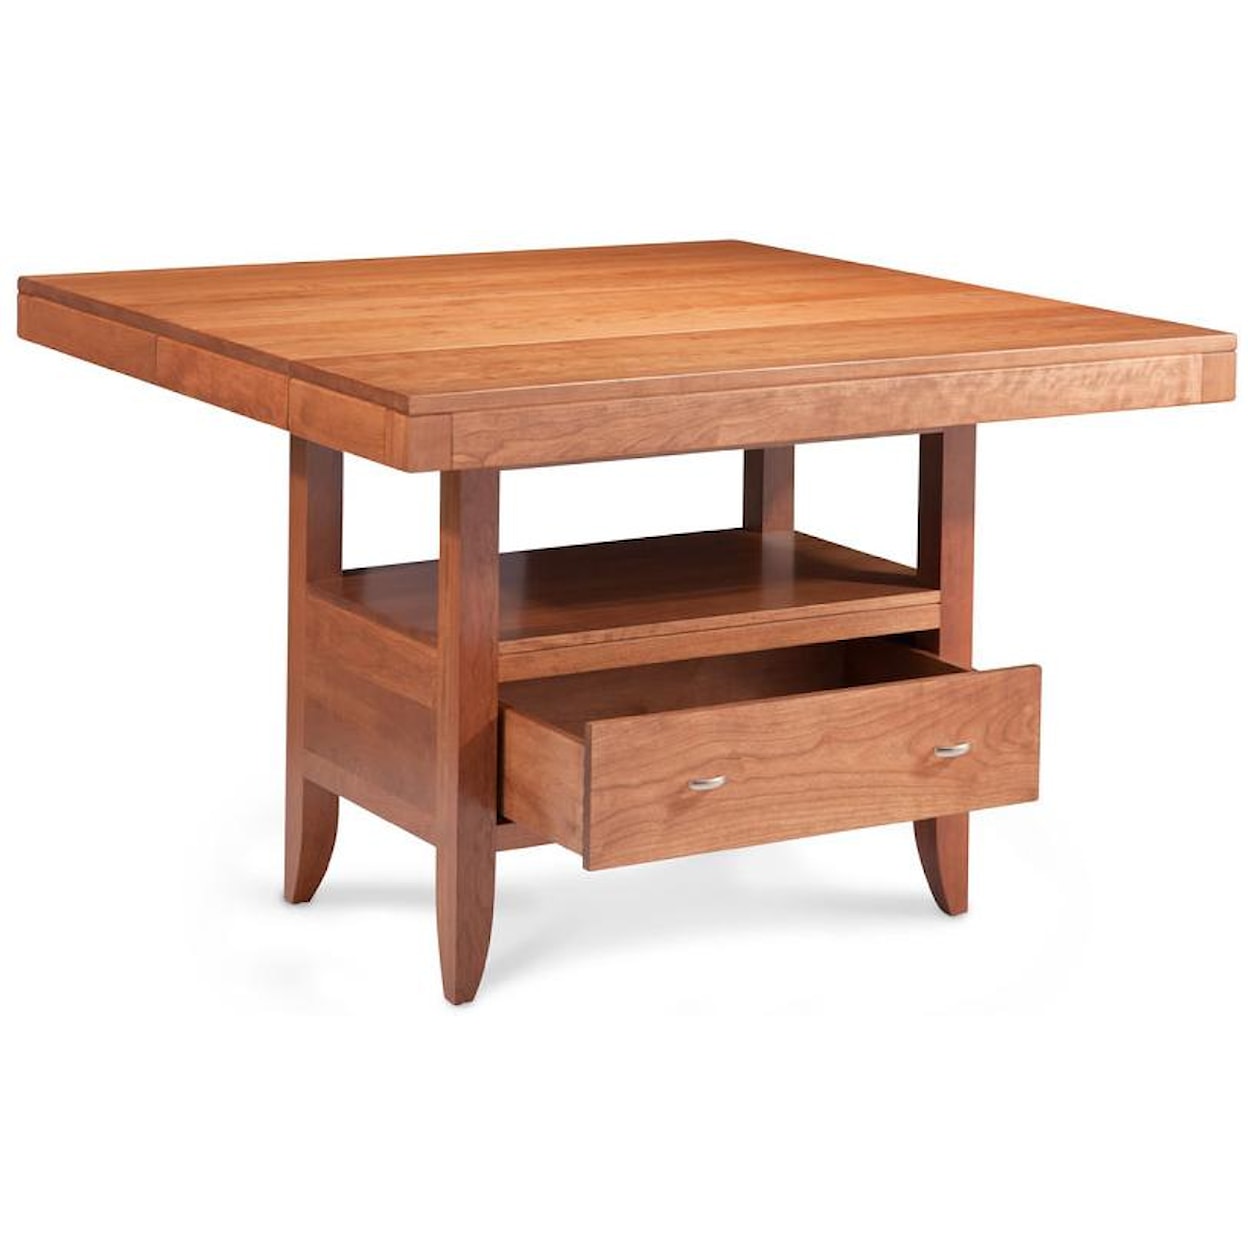 Simply Amish Justine Island Table